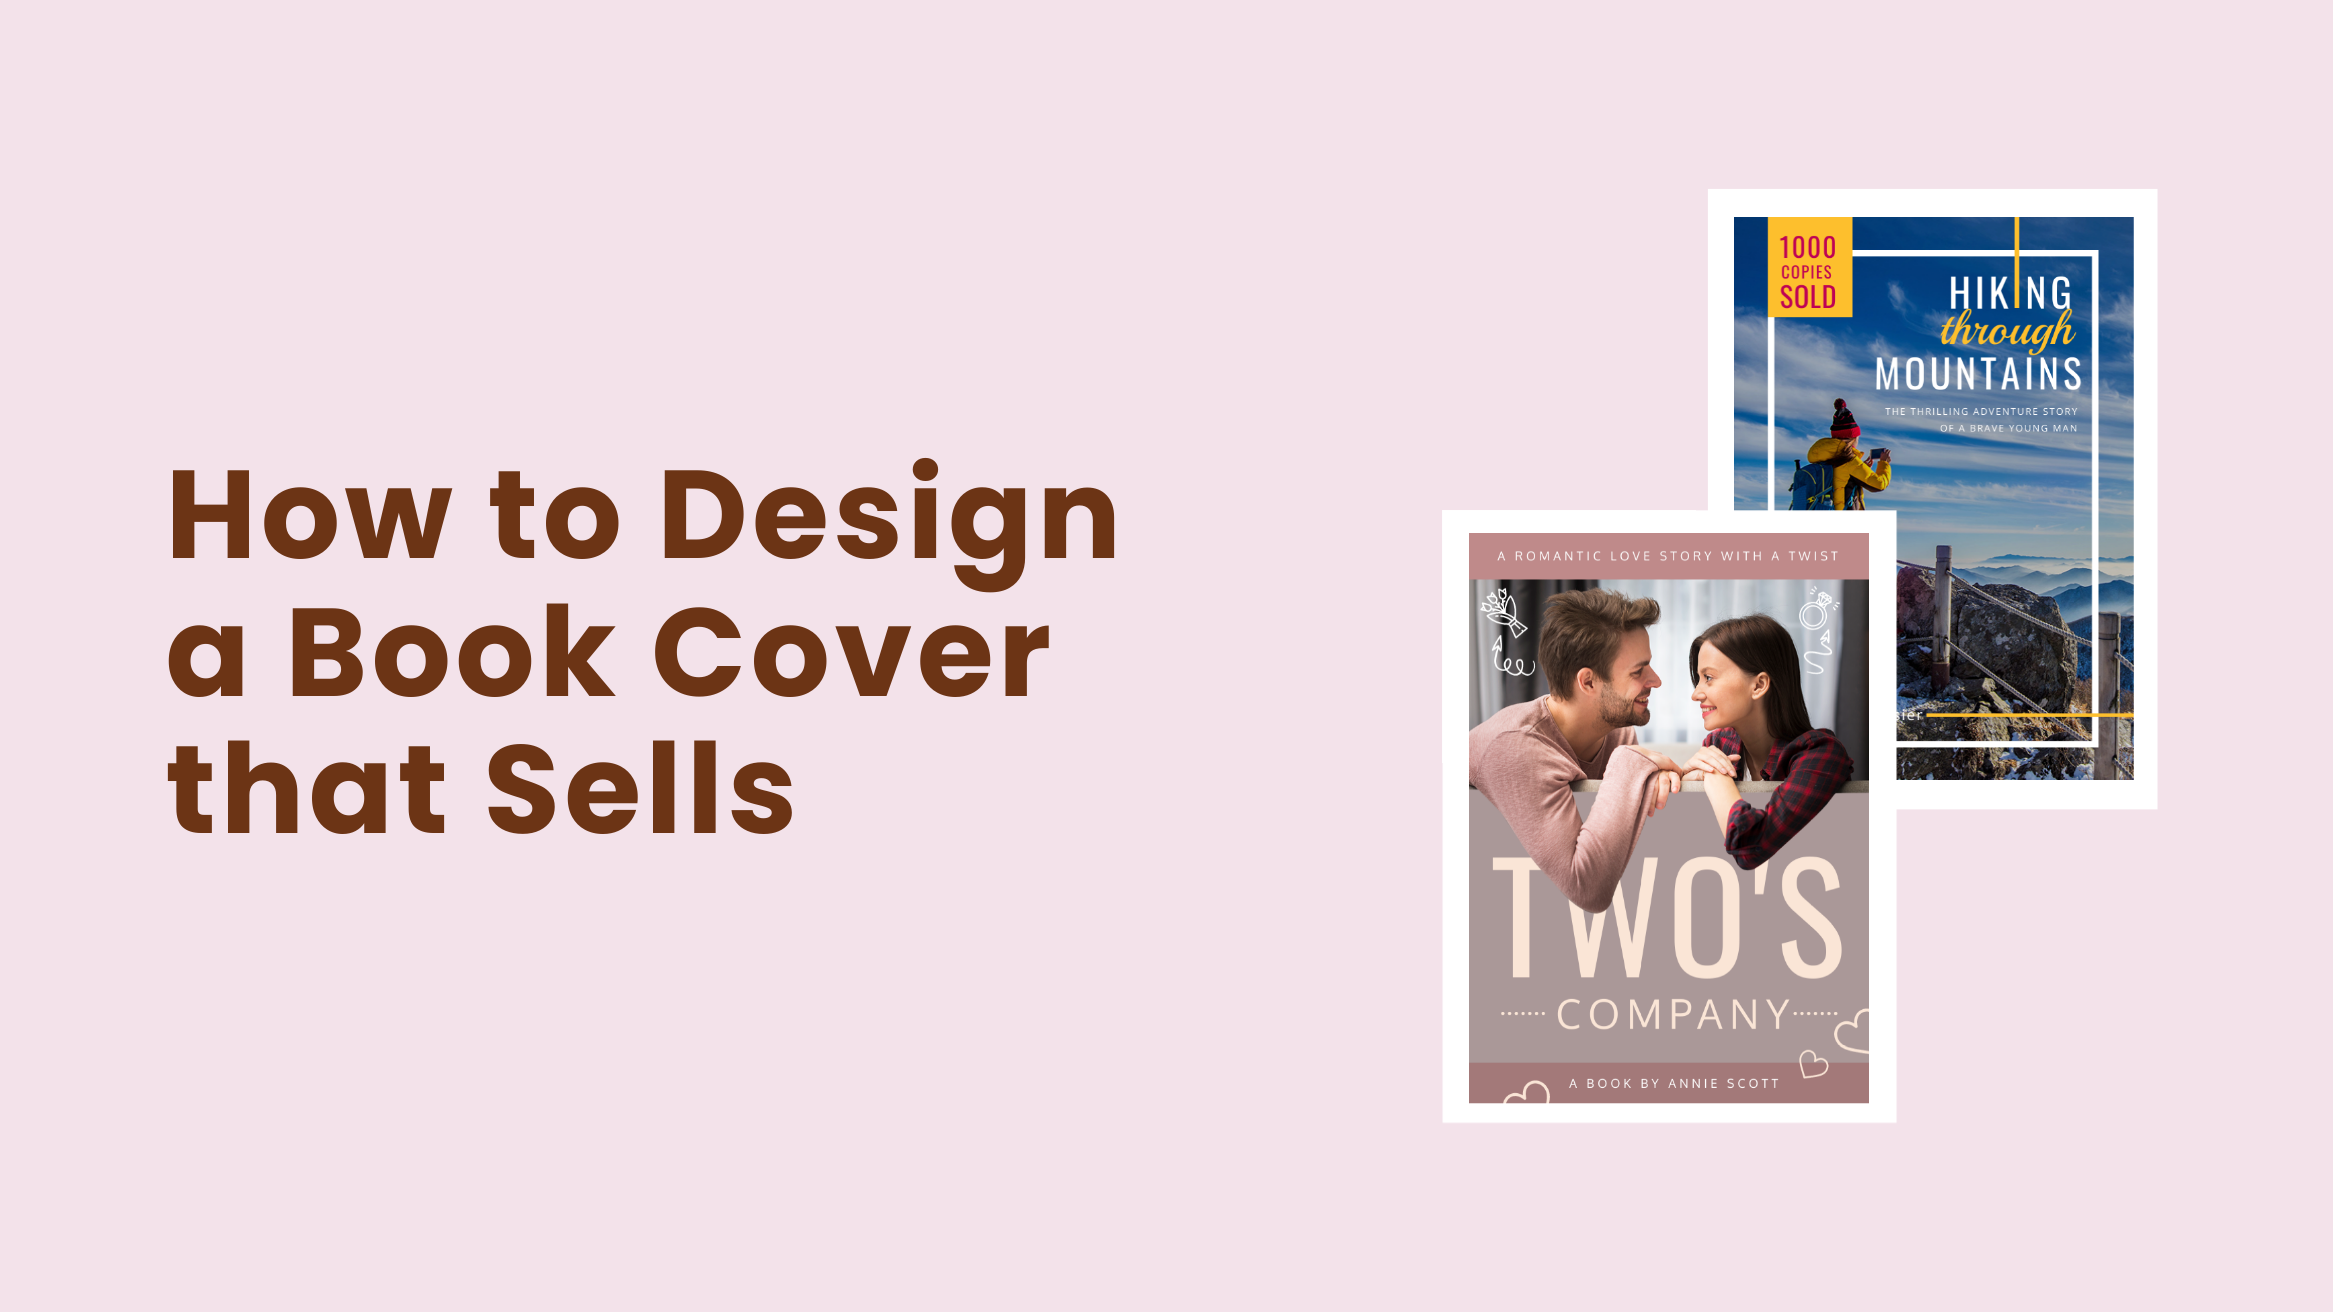 How to Design a Book Cover that Sells